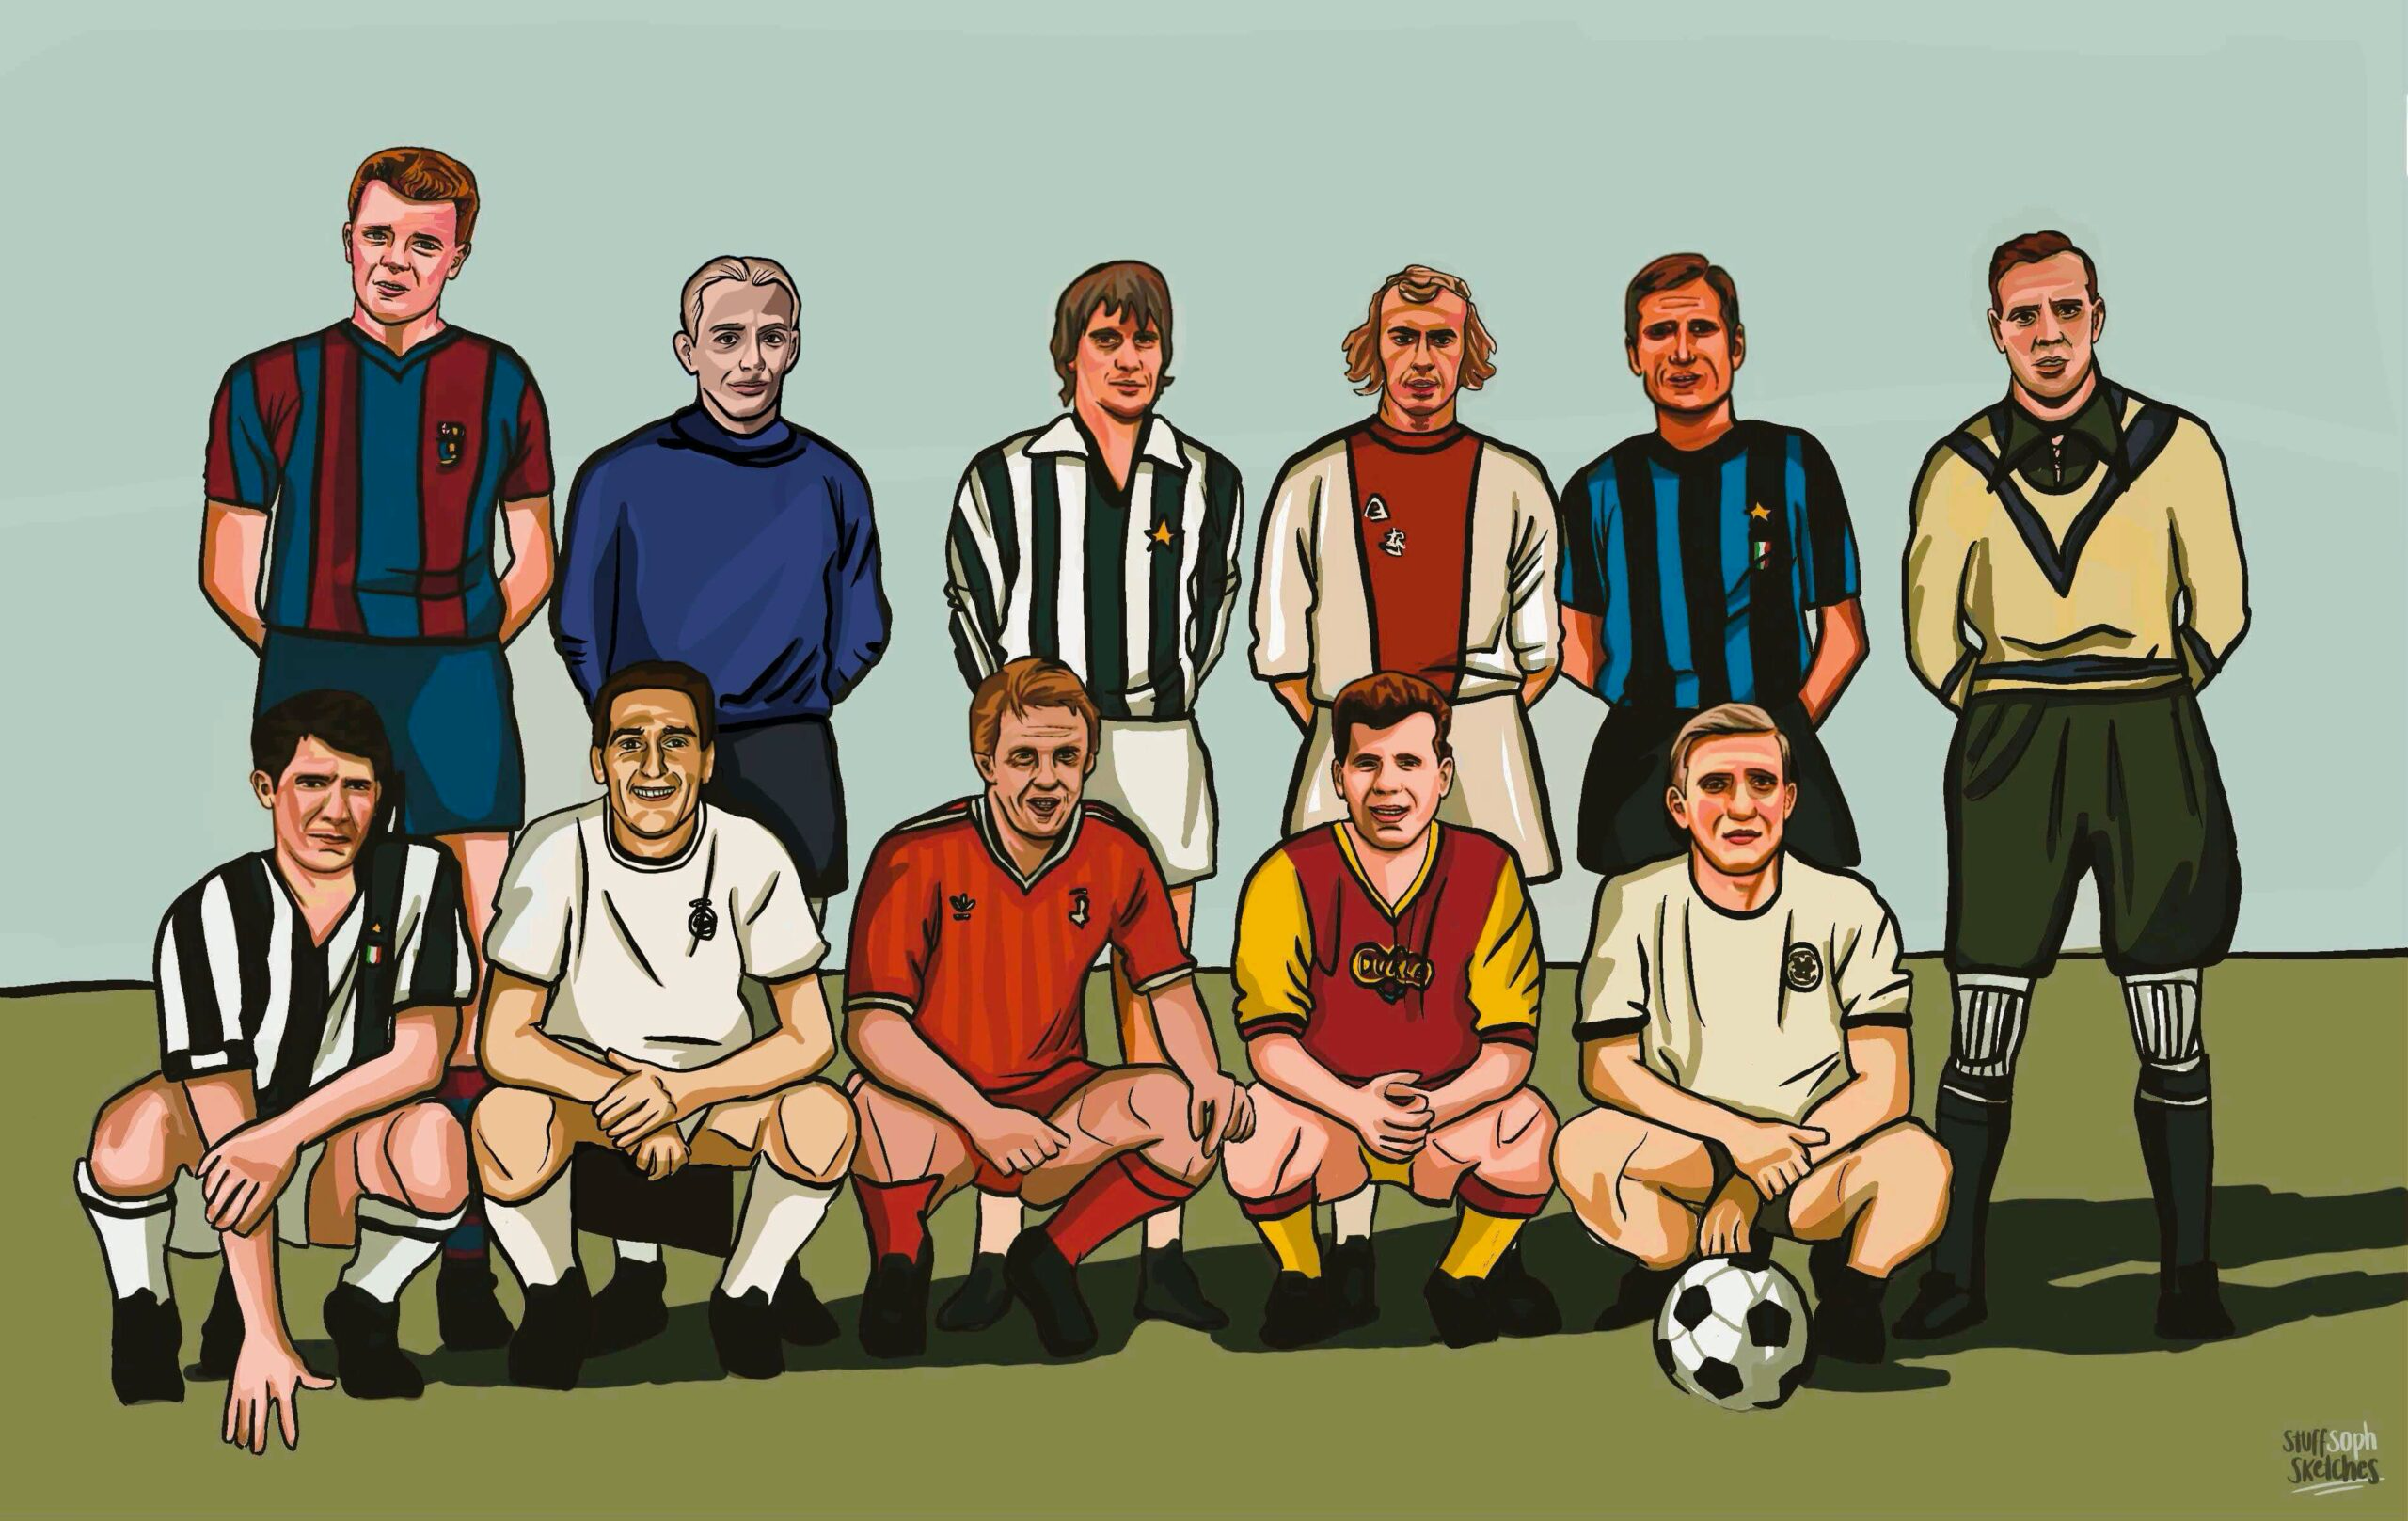 The complete Forgotten Eleven lineup in full colour